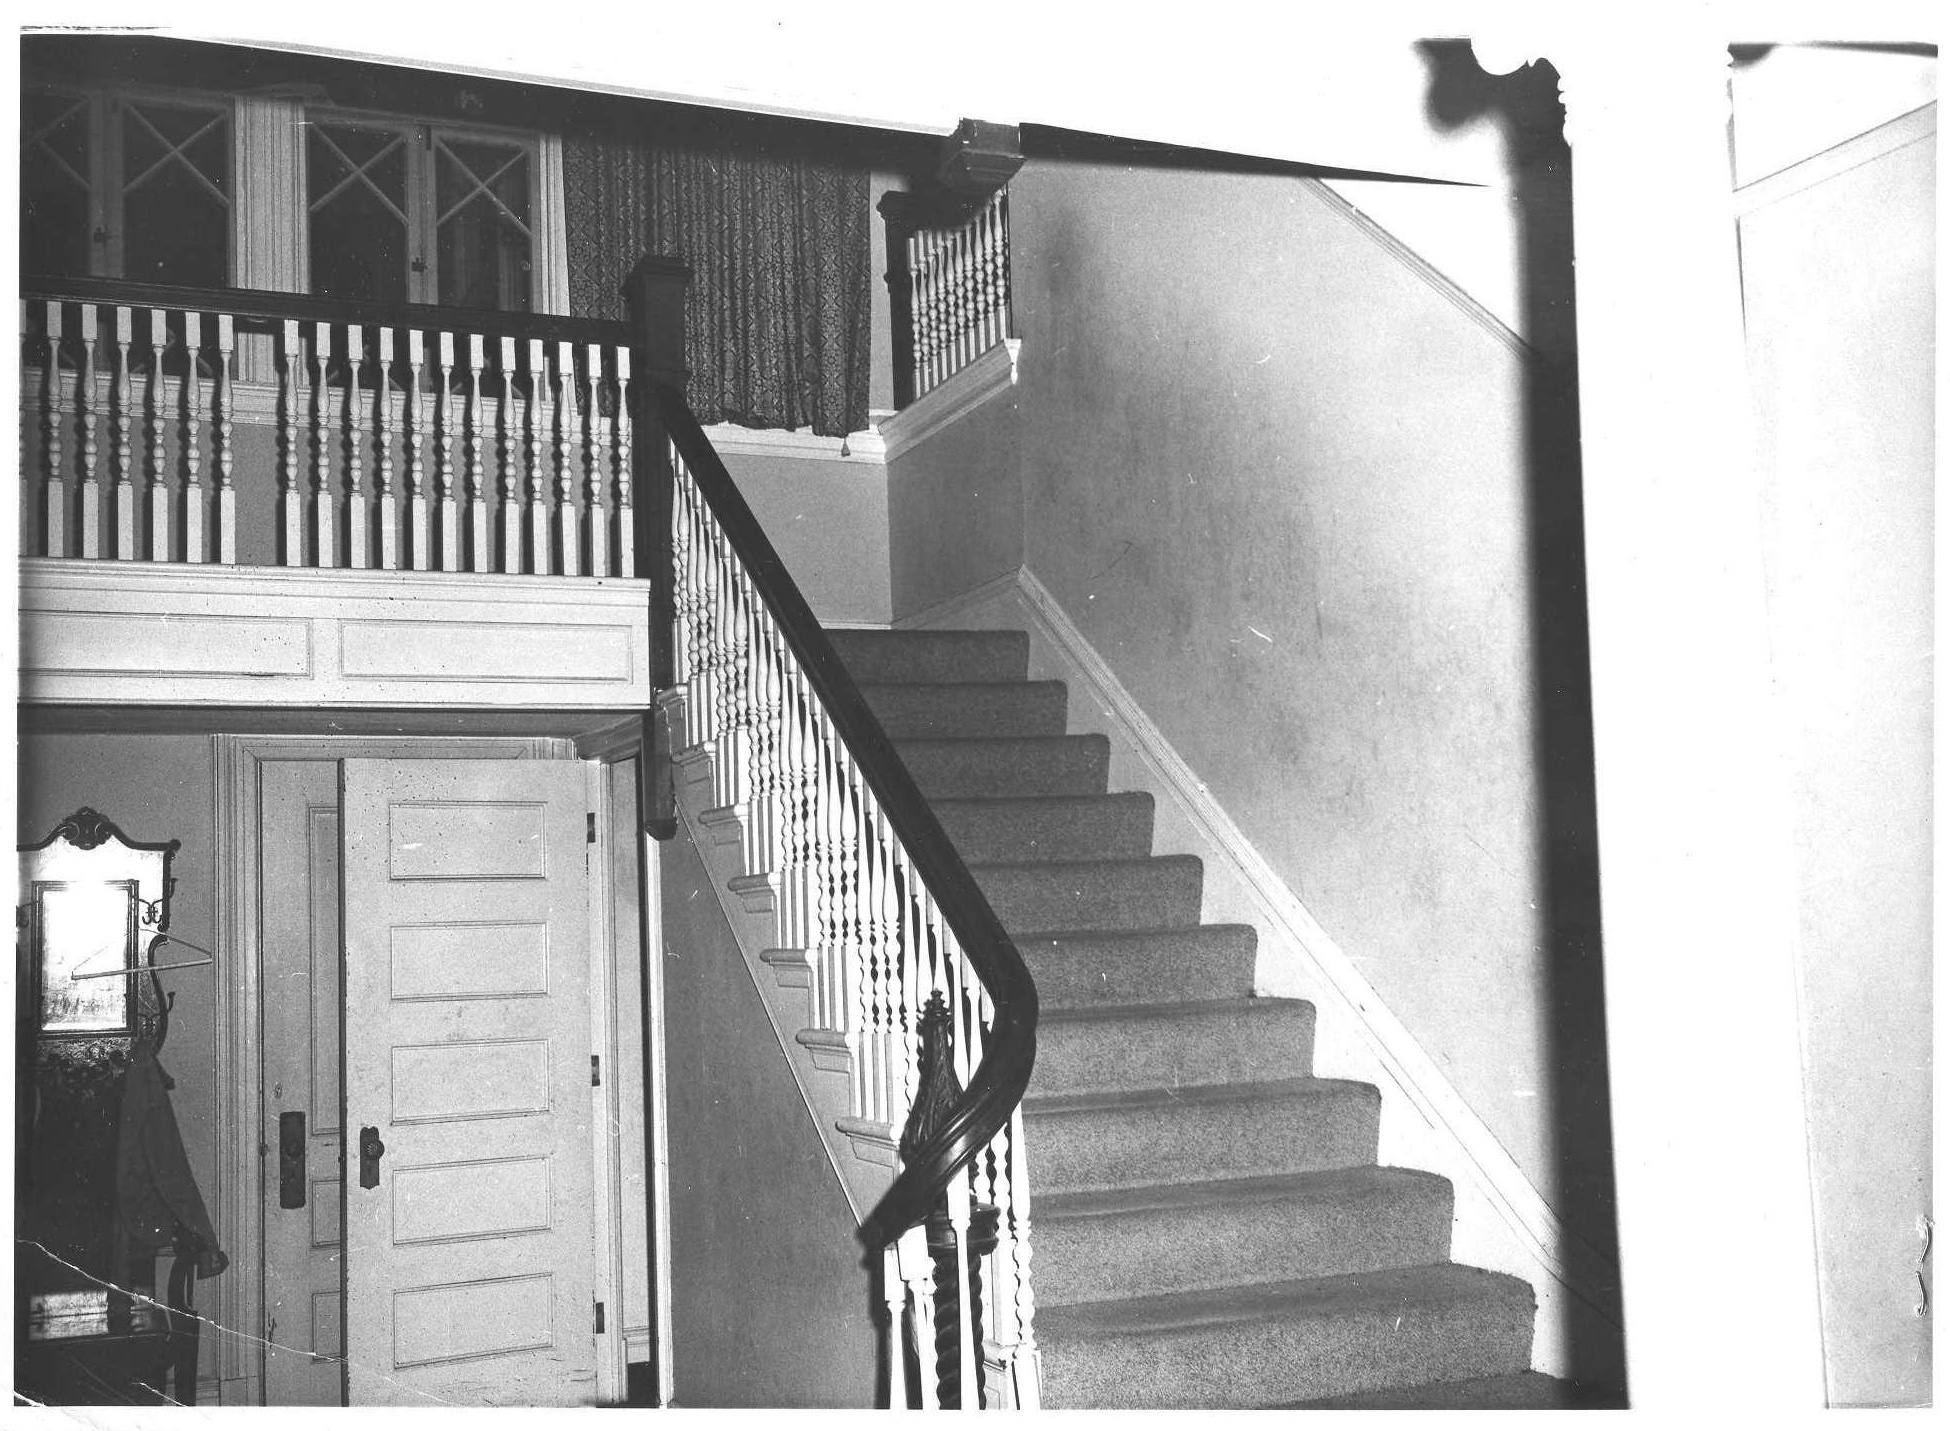 The List mansion main hall, with a stairway to second and third floors.